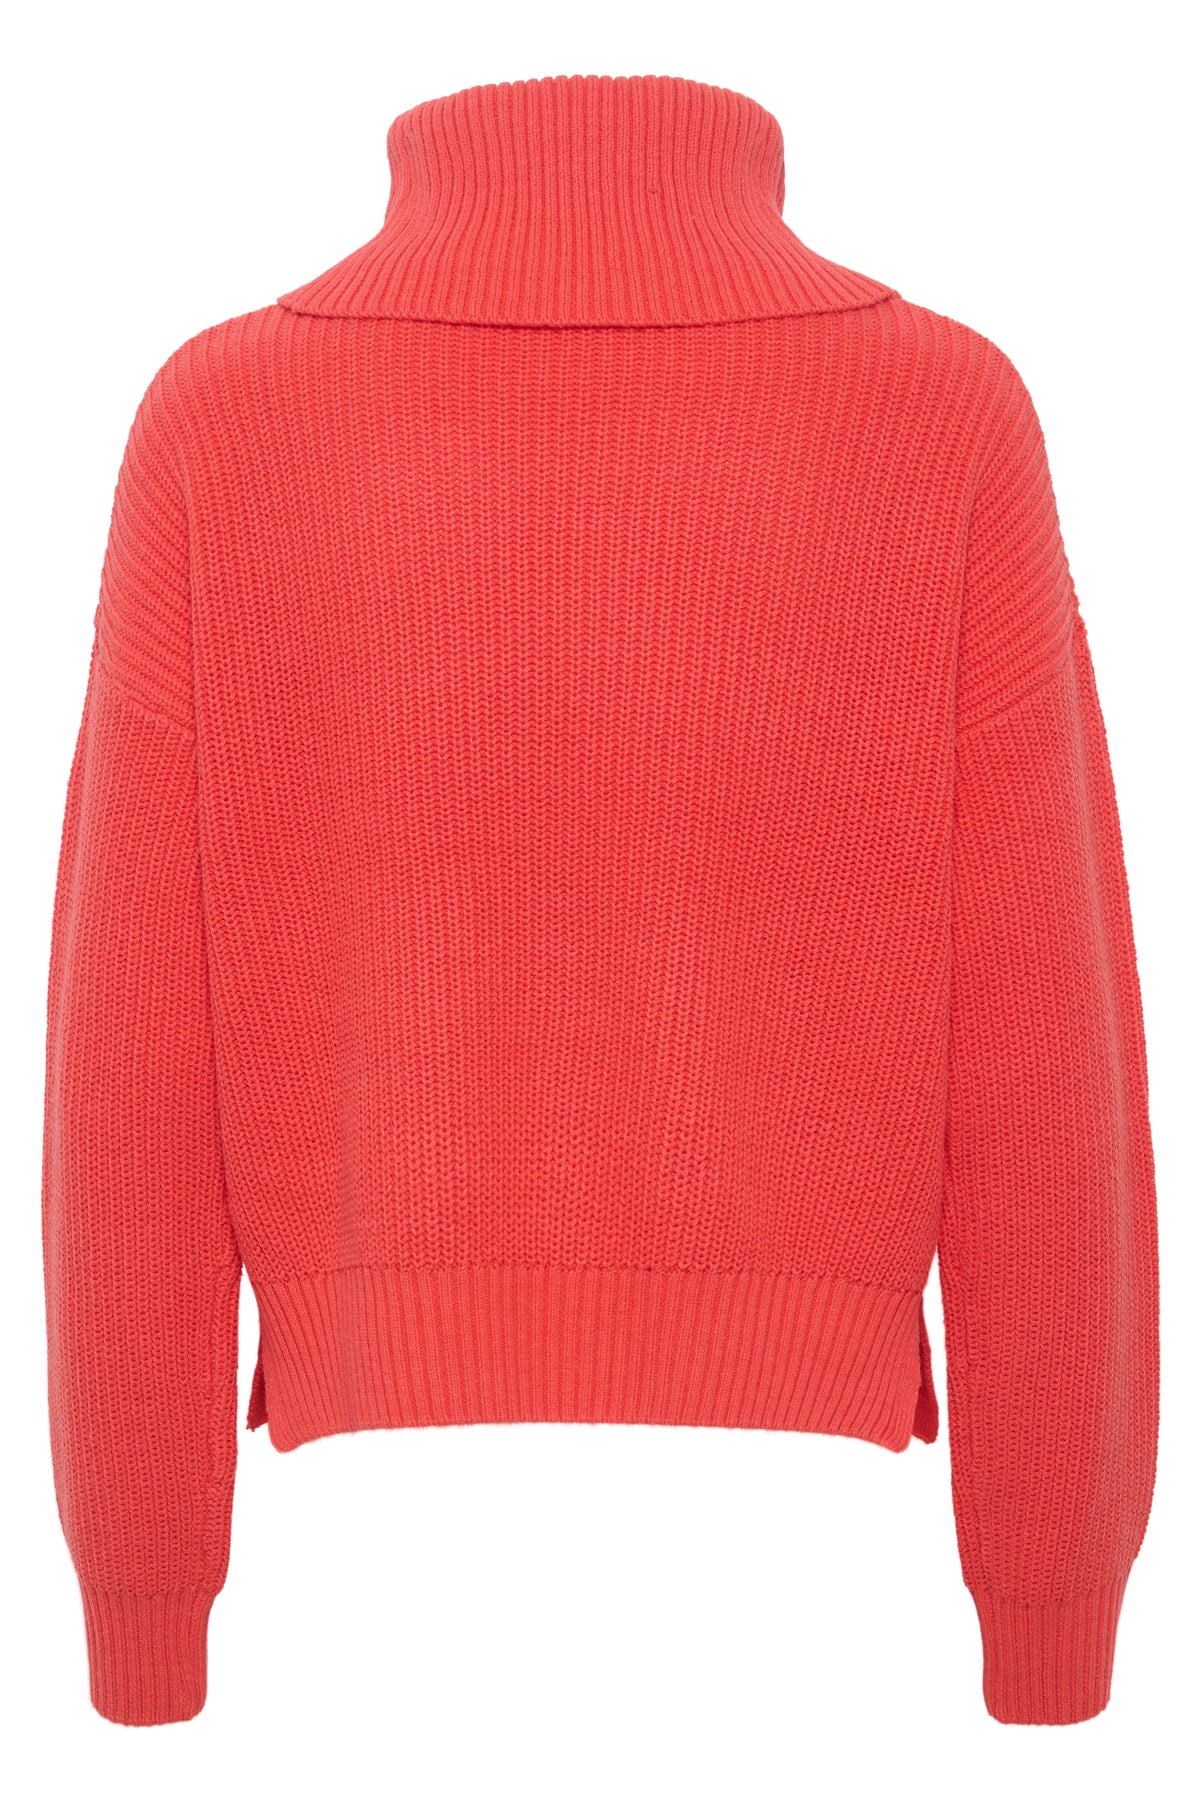 Saint Tropez Cloudy Cayenne Cowl Neck Knitted Pullover, 30513030